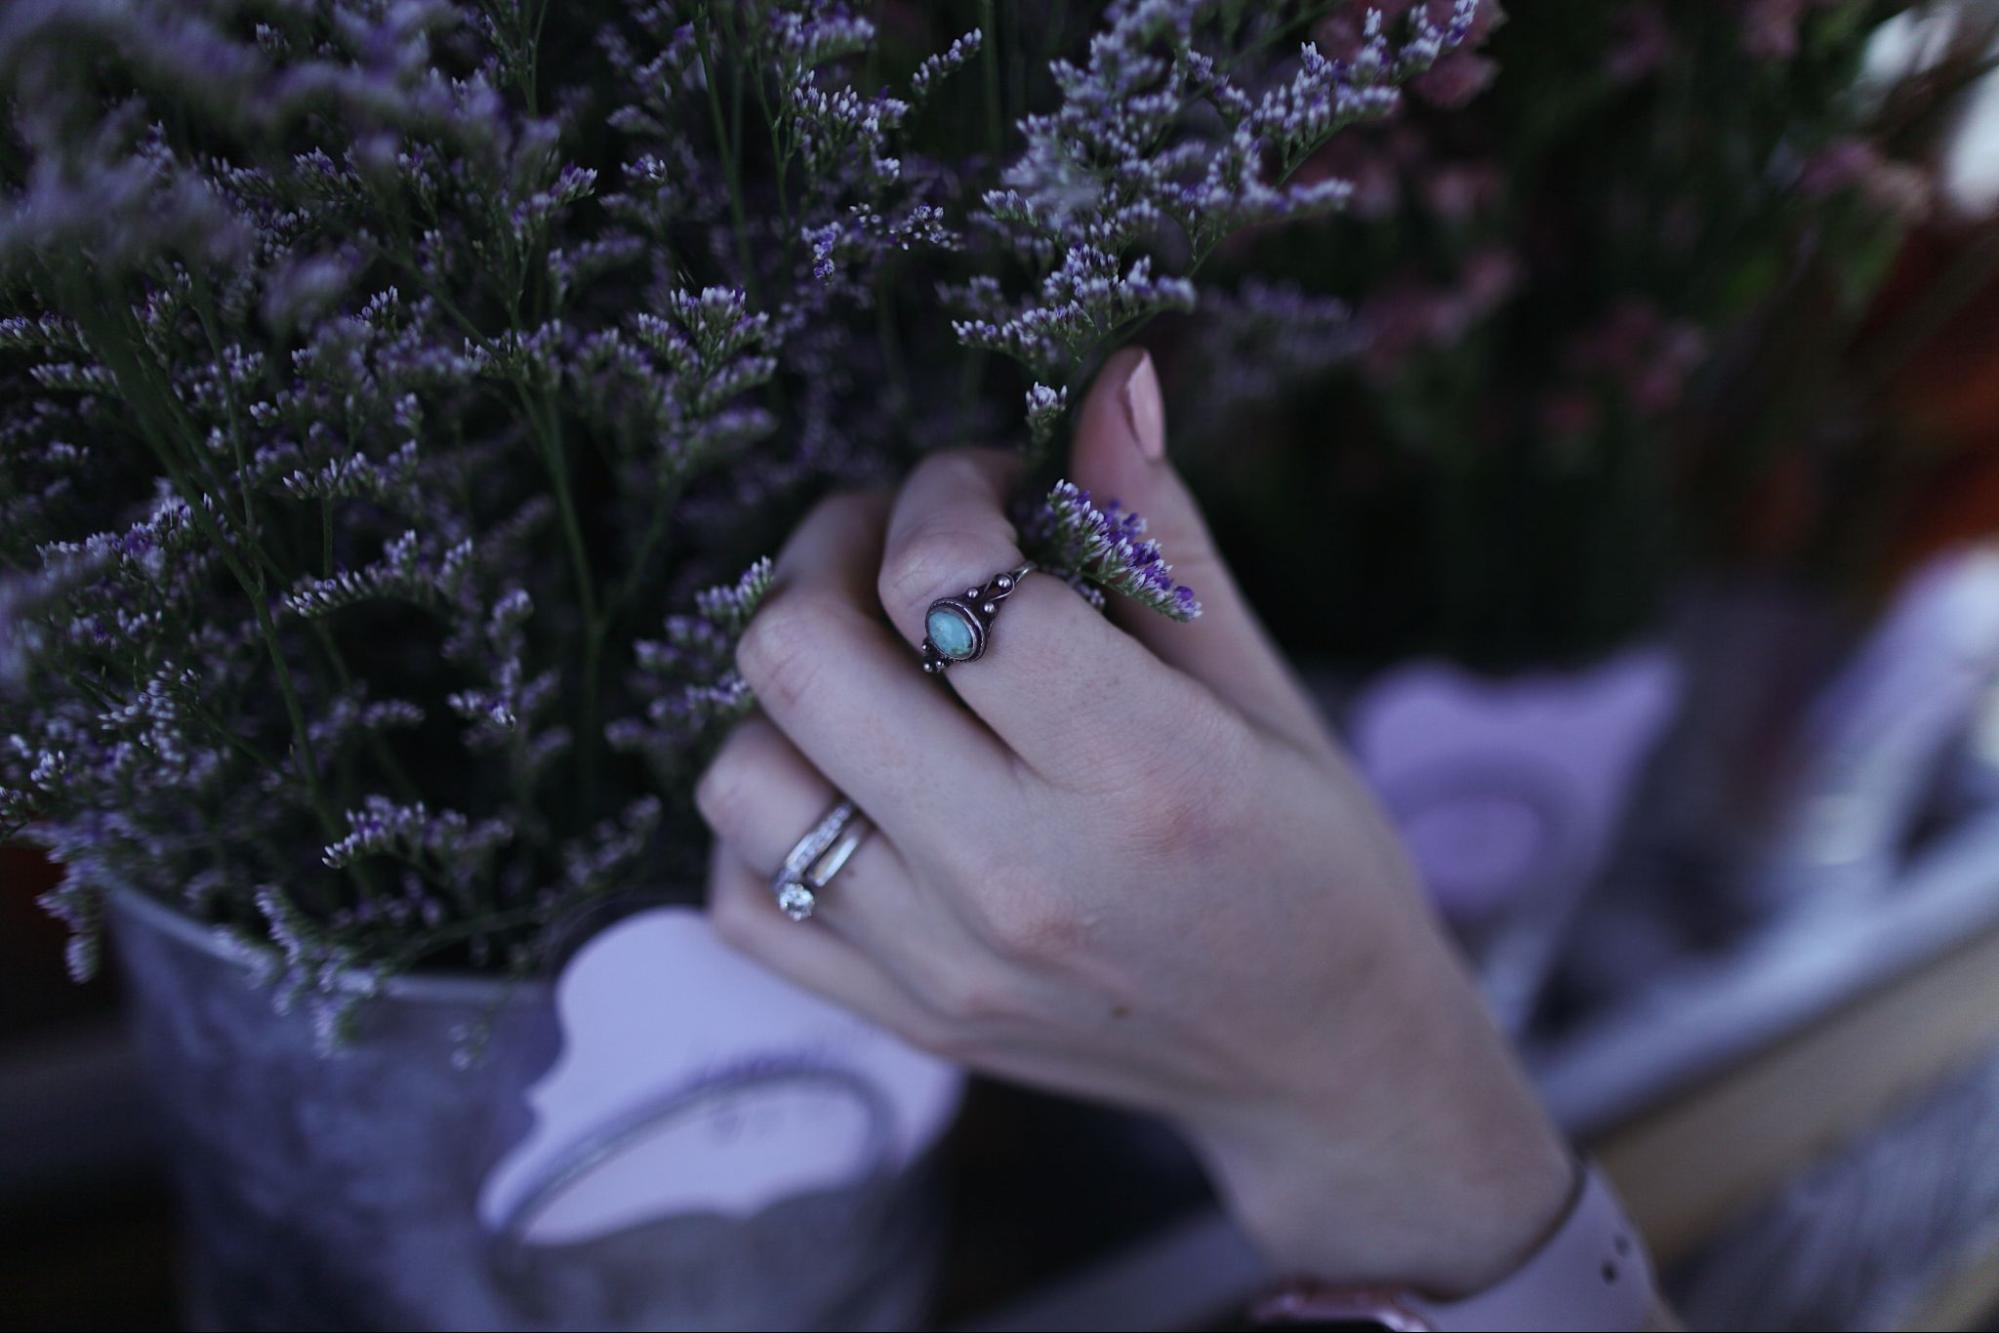 A woman grabs a lavender flower wearing her bridal jewelry and a turquoise fashion ring.